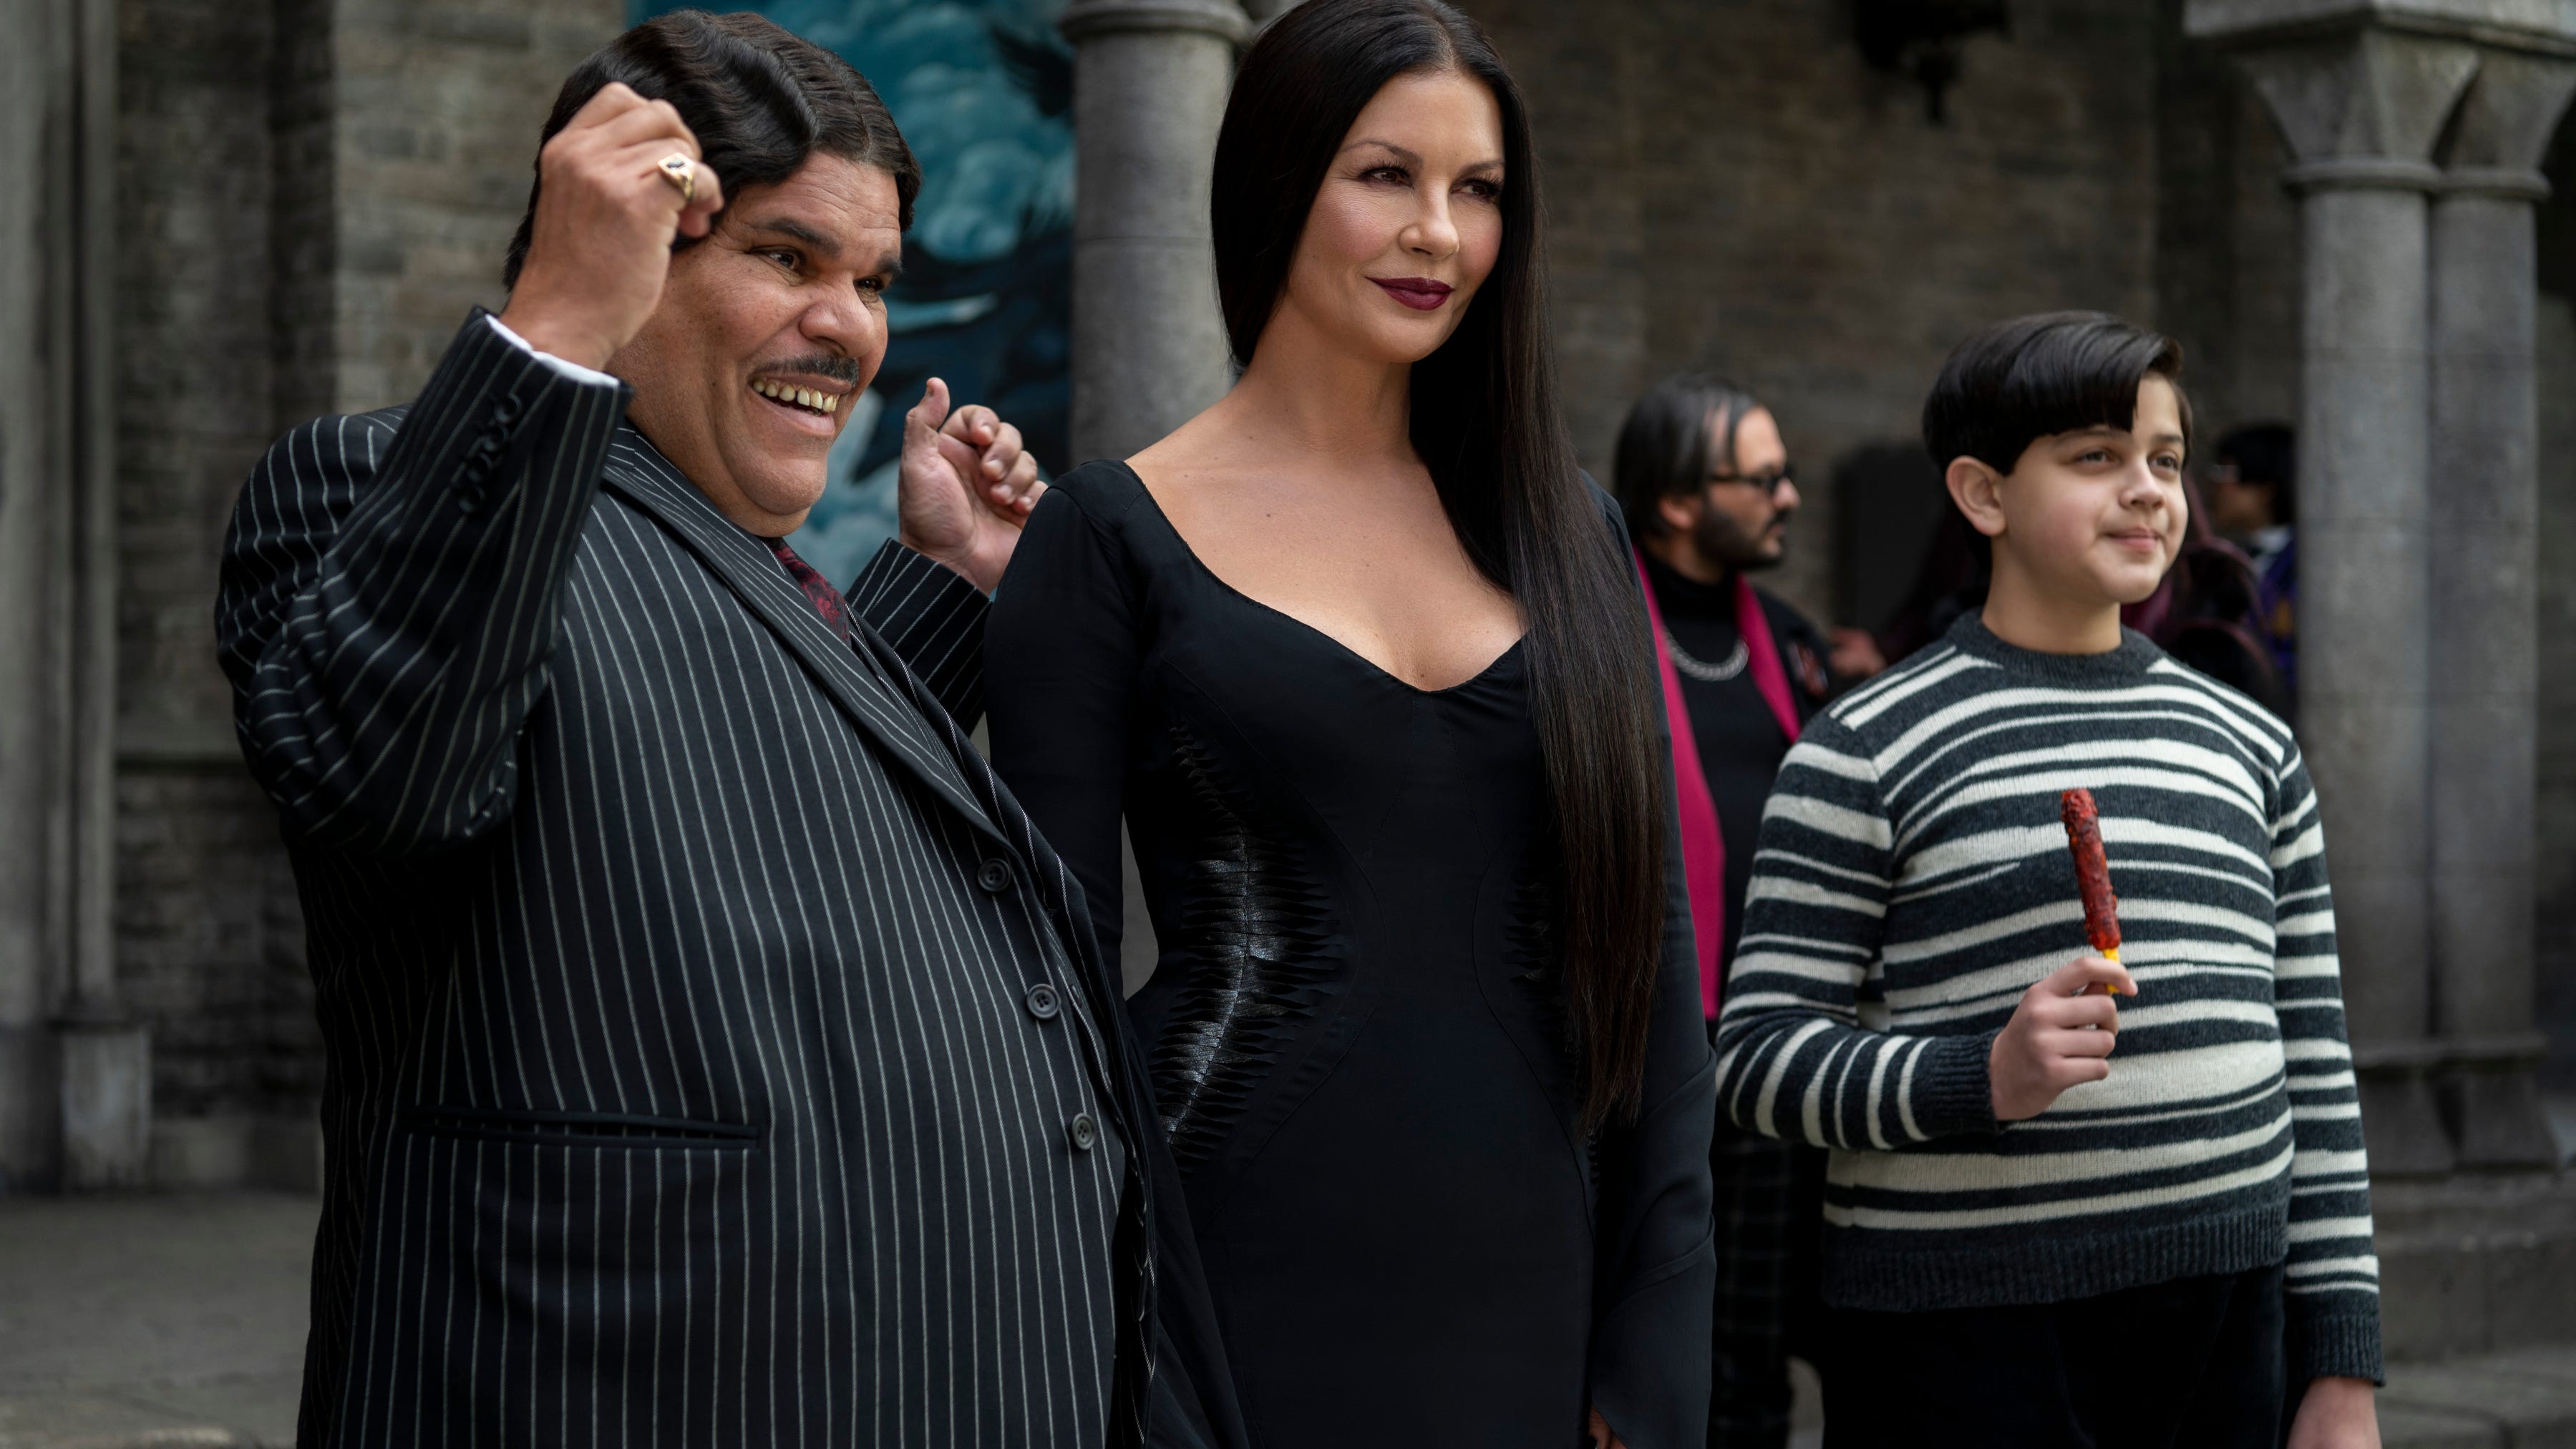 The rest of the Addams family: Luis Guzmán as Gomez Addams, Catherine Zeta-Jones as Morticia Addams and Issac Ordonez as Pugsley Addams in "Wednesday."